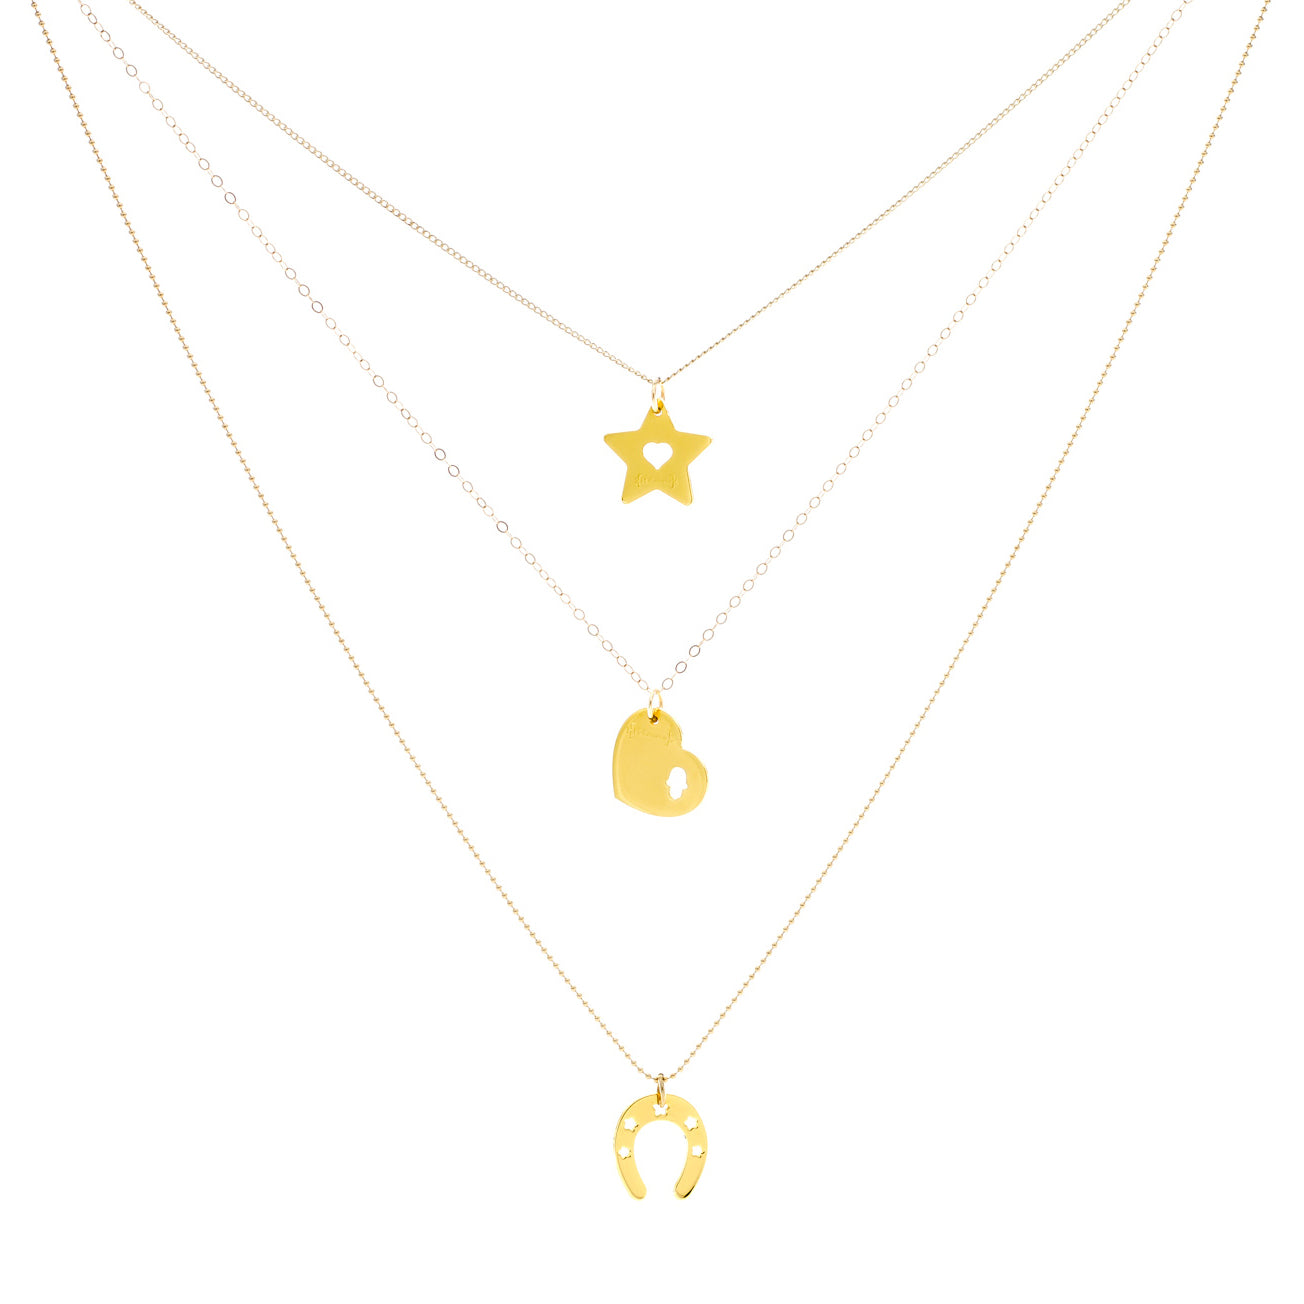 Extra Love Extra Luck Layered Necklaces